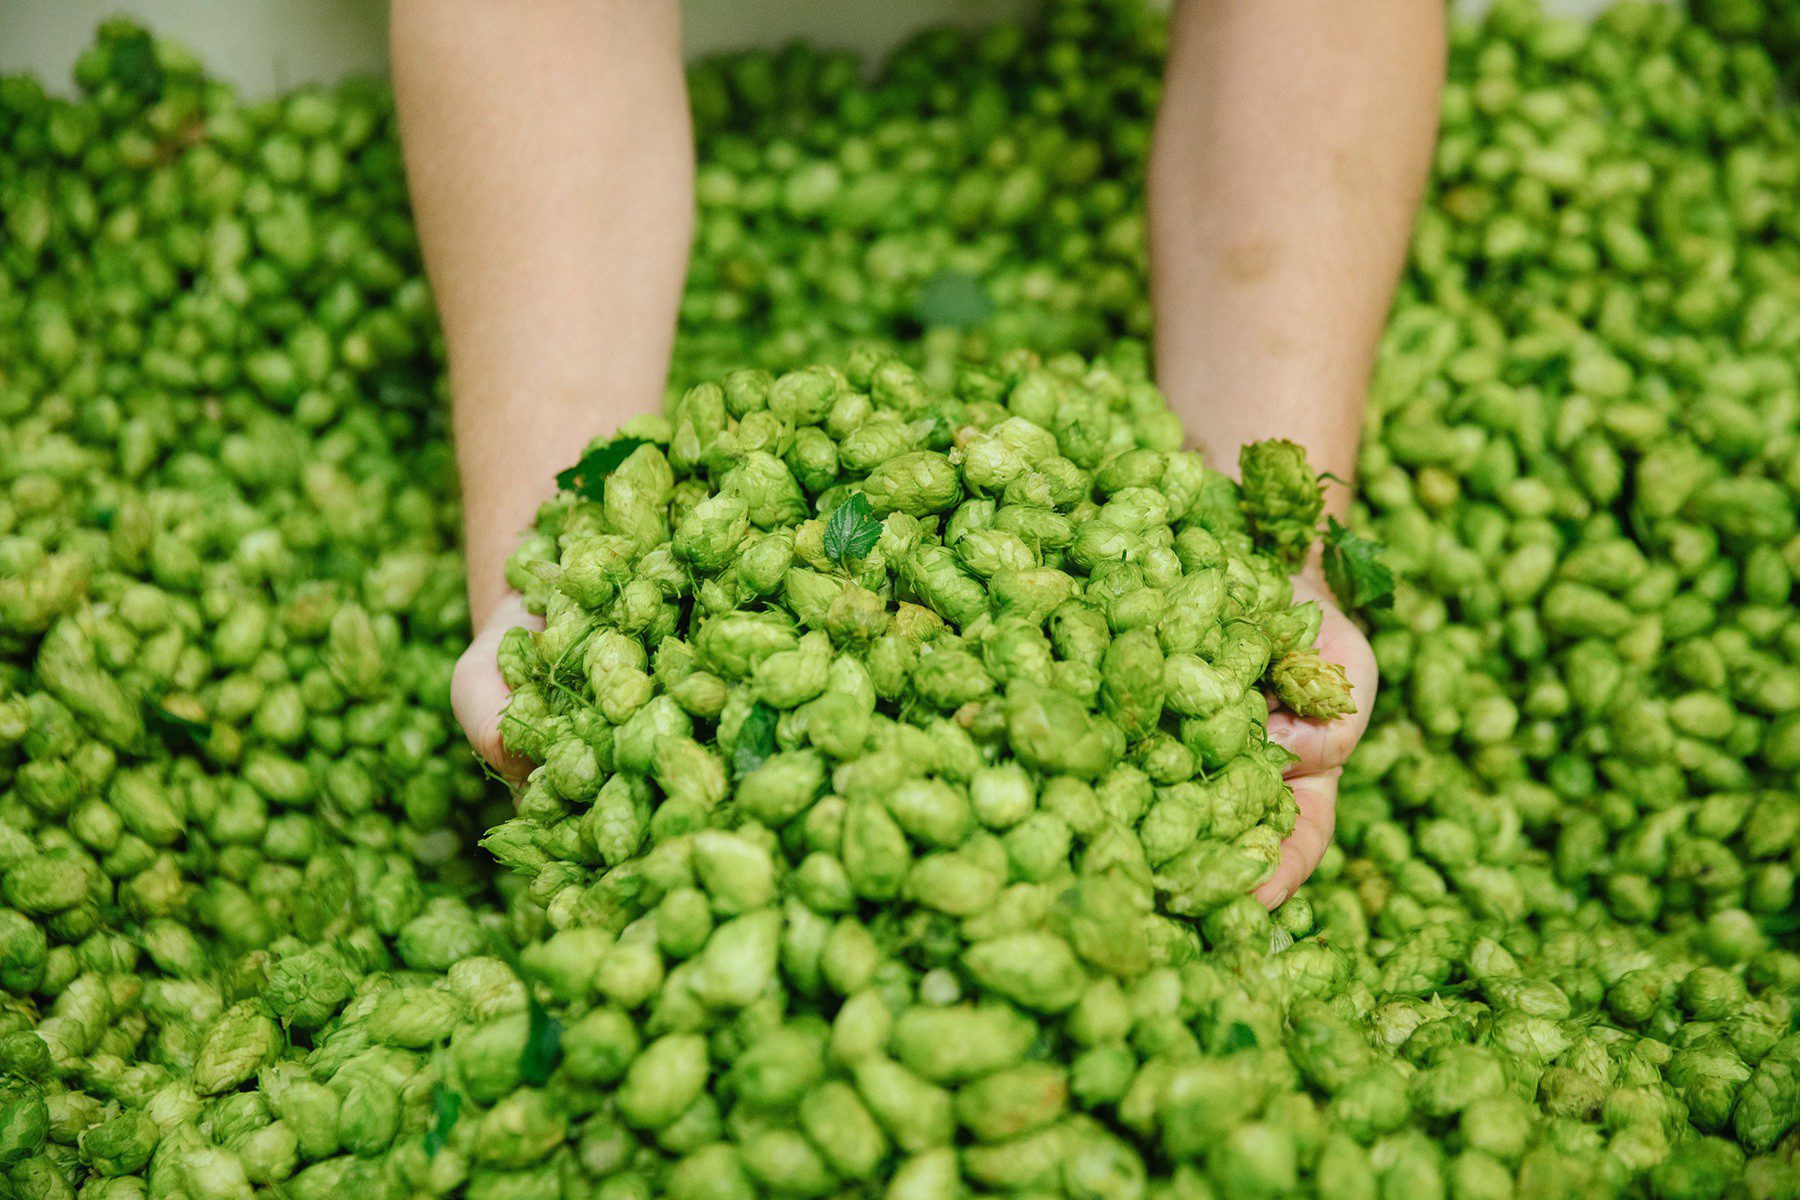 Two hands reaching into a pile of freshly harvested hops.